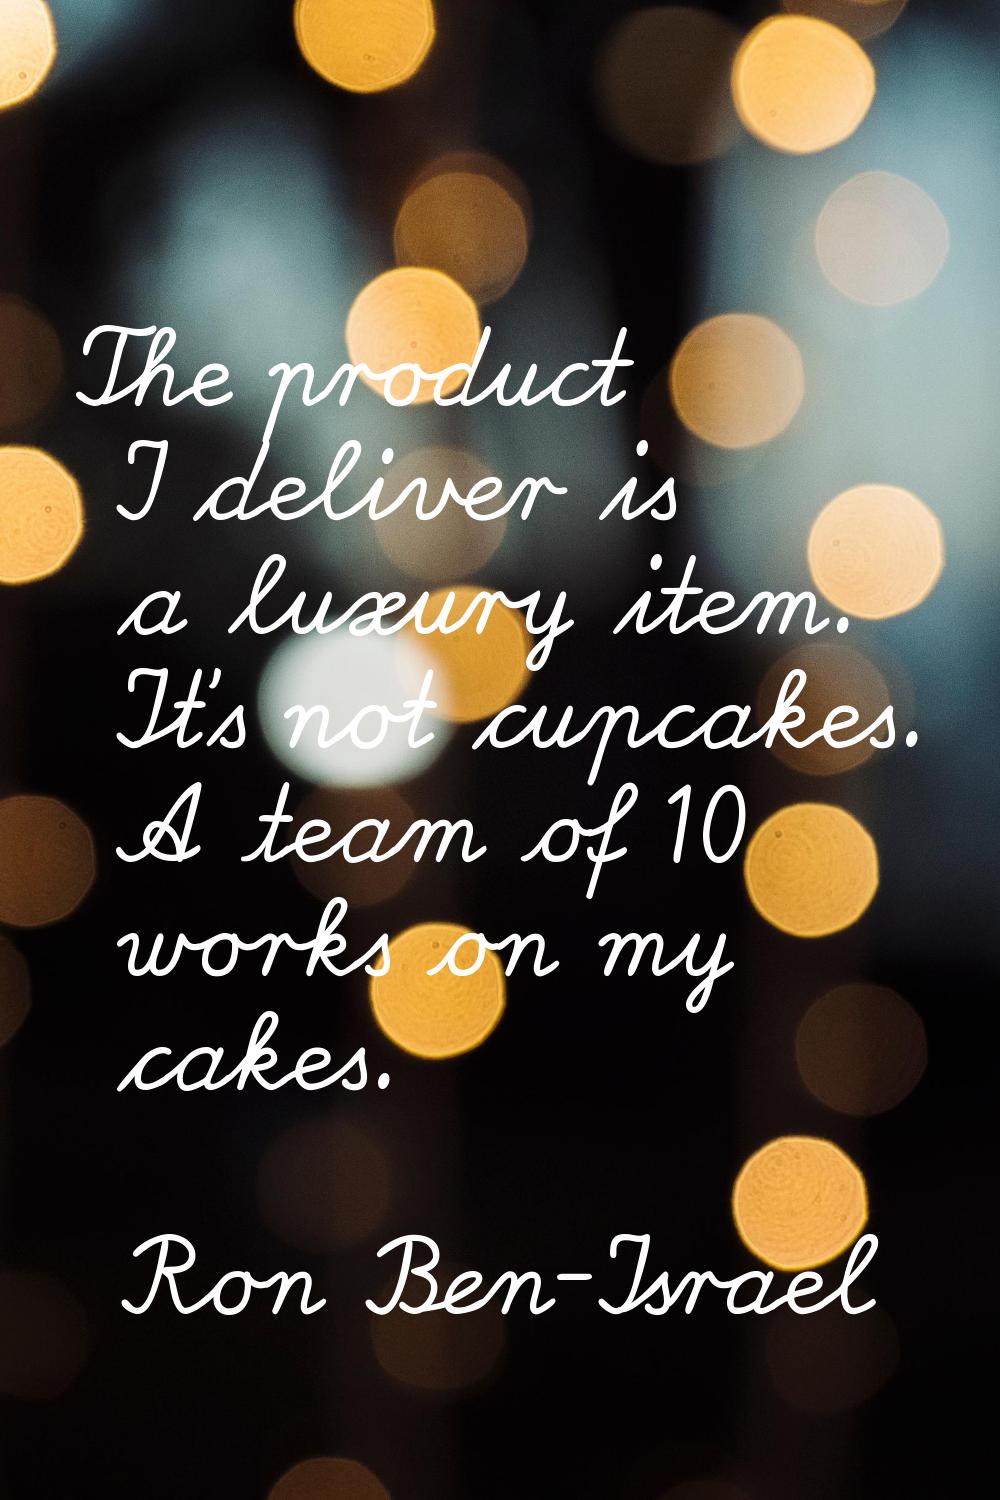 The product I deliver is a luxury item. It's not cupcakes. A team of 10 works on my cakes.